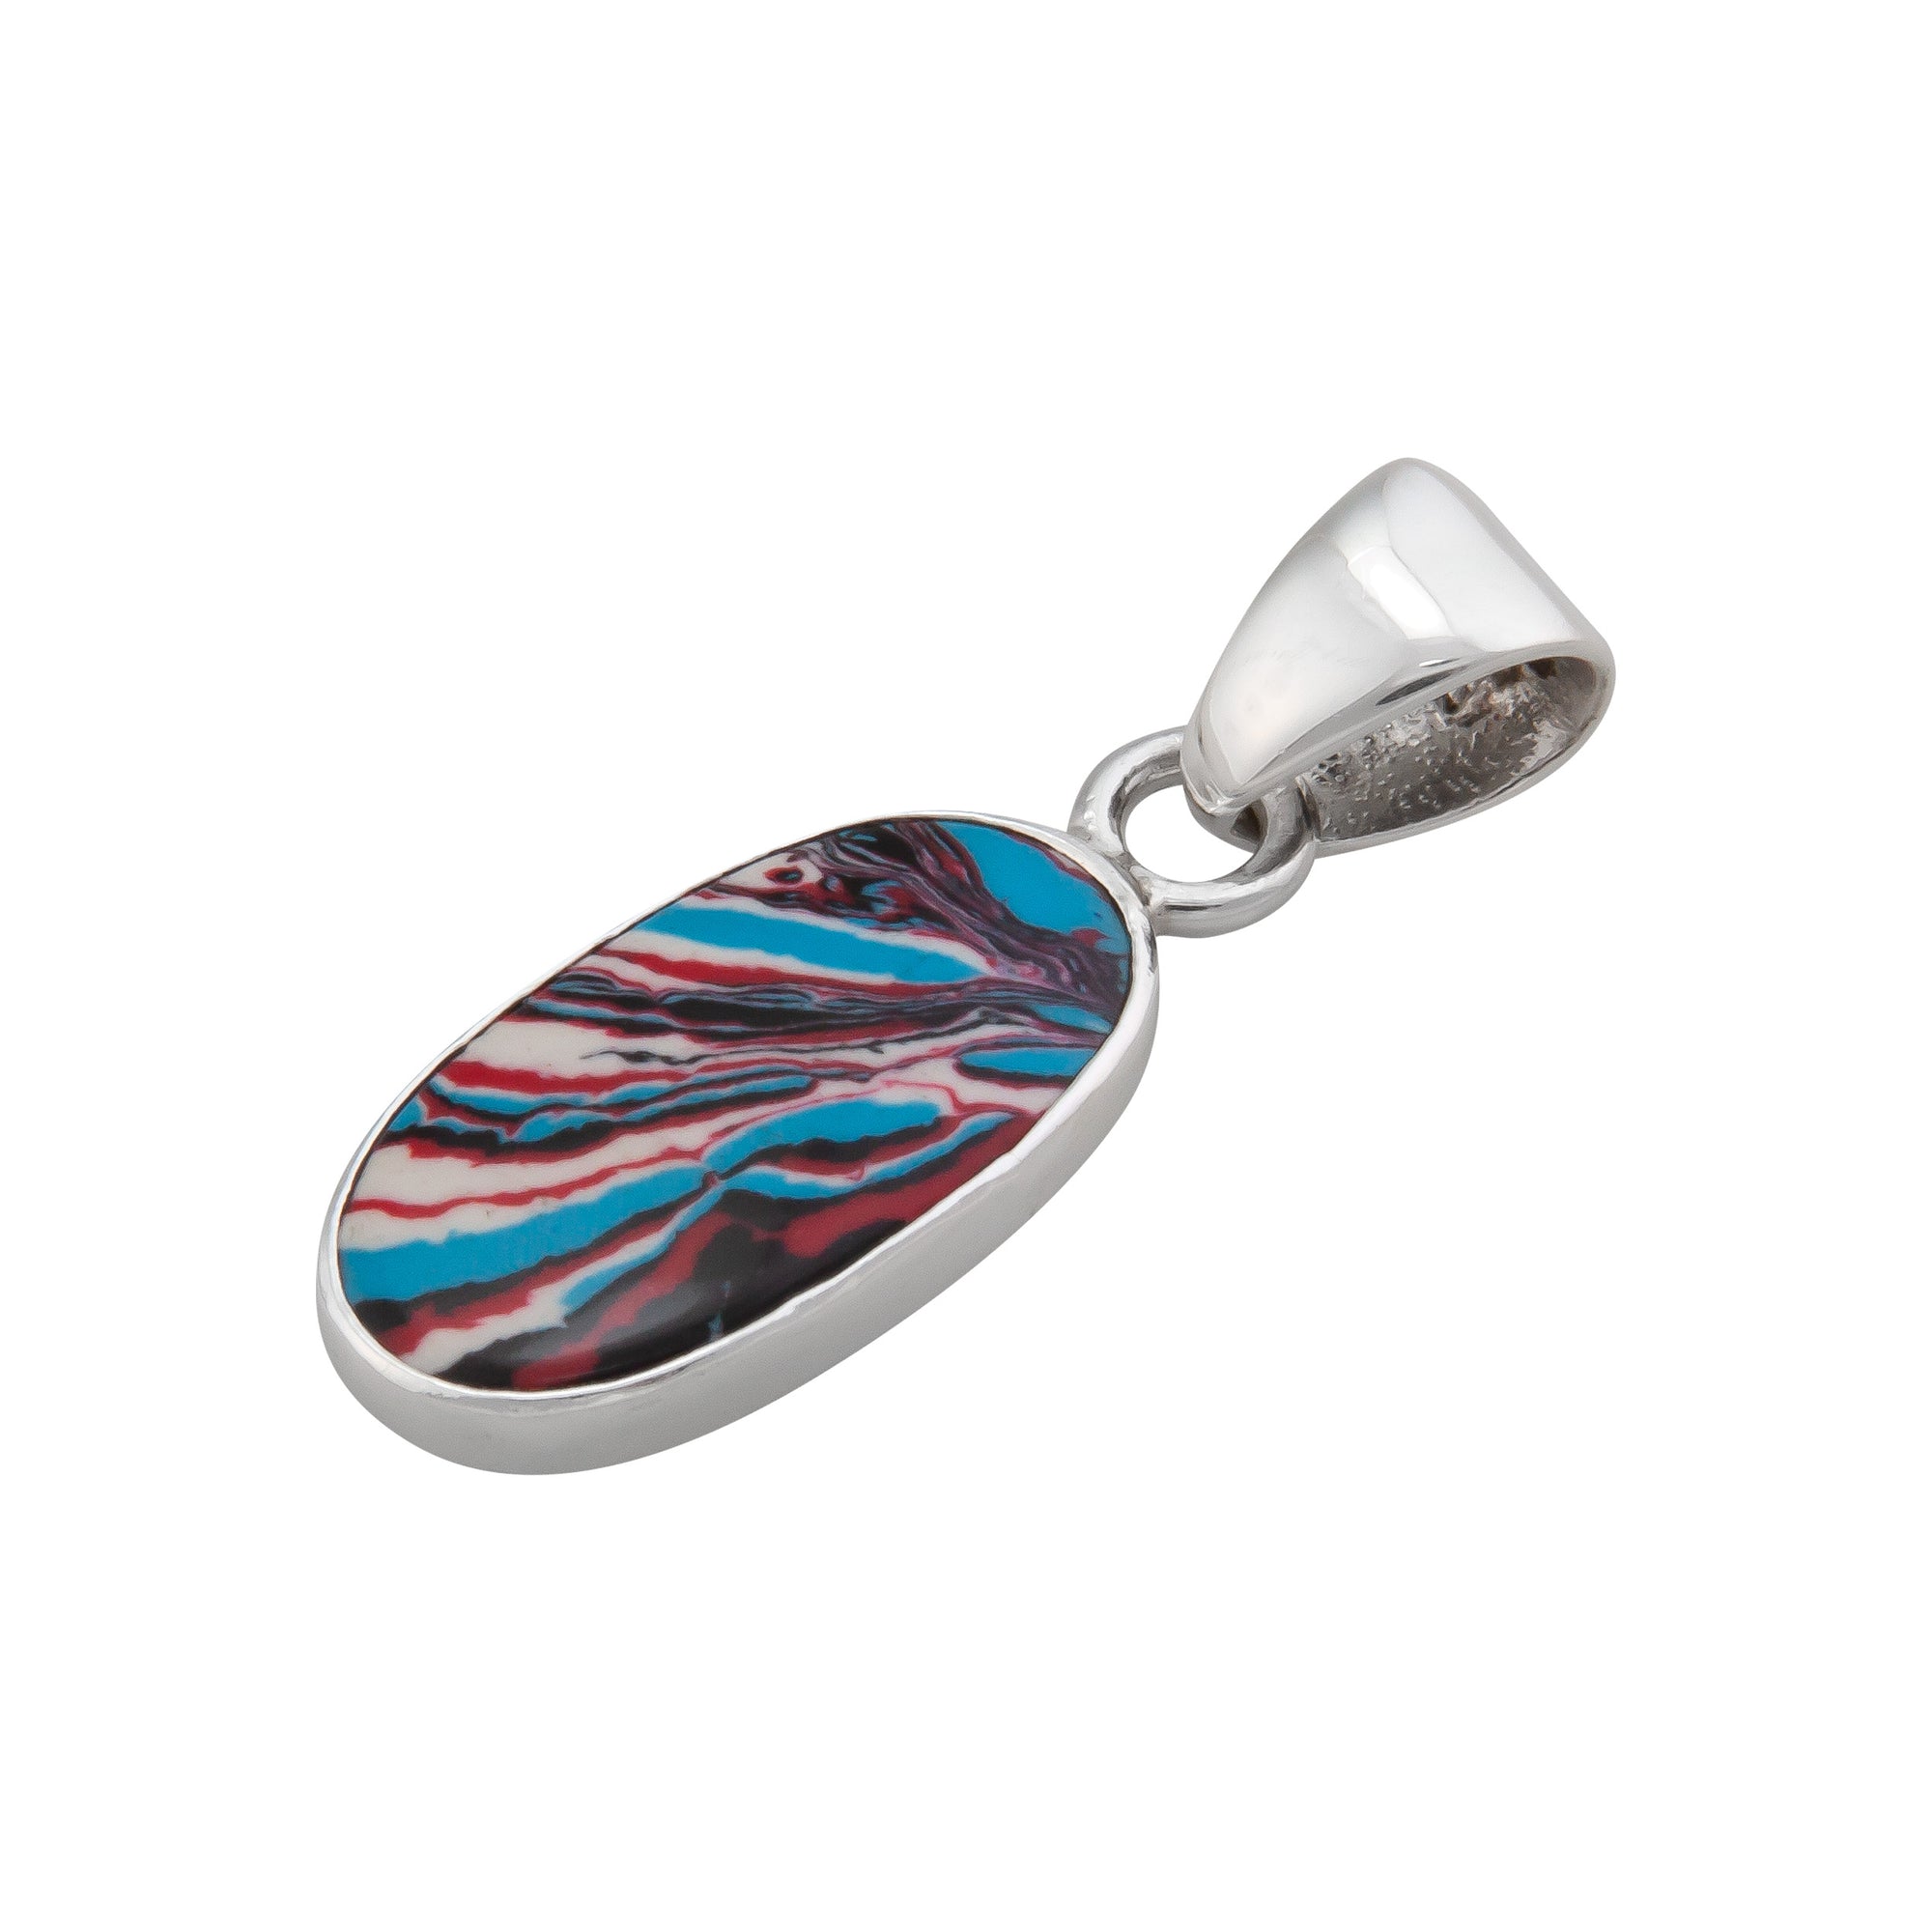 Sterling Silver Fordite Pendant | Charles Albert Jewelry